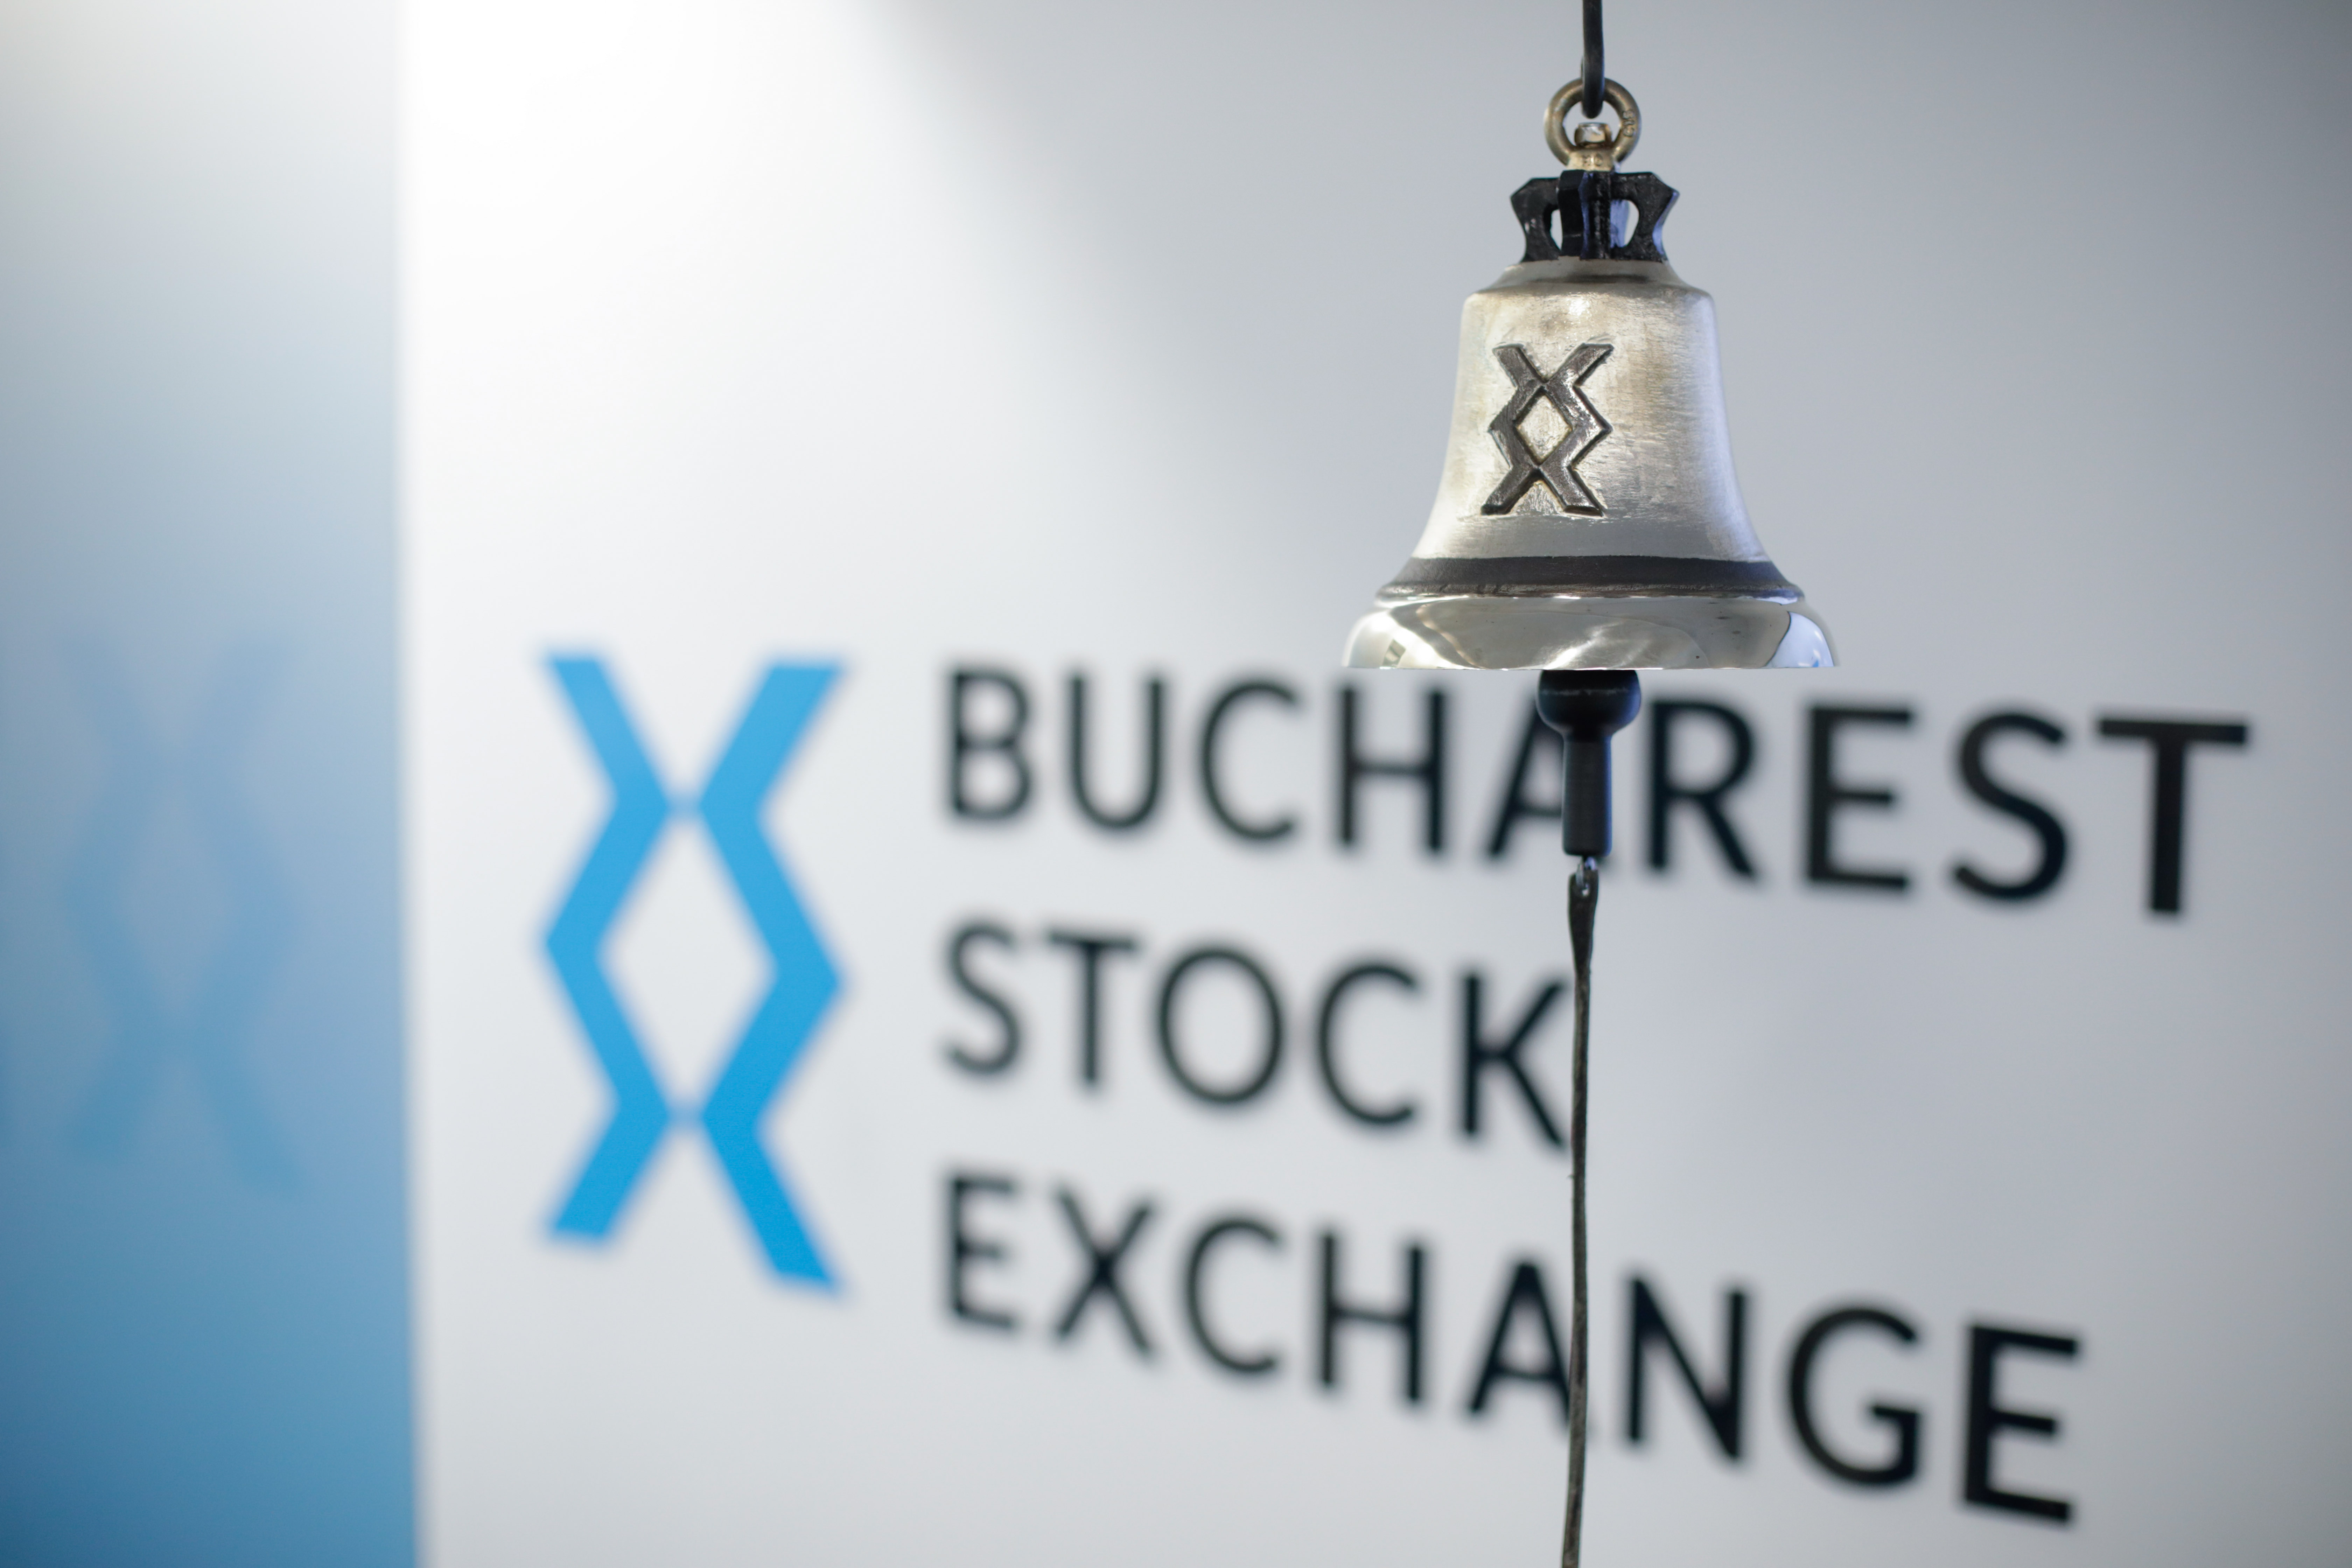 Bucharest Stock Exchange launches AI chatbot to help investors learn about stocks